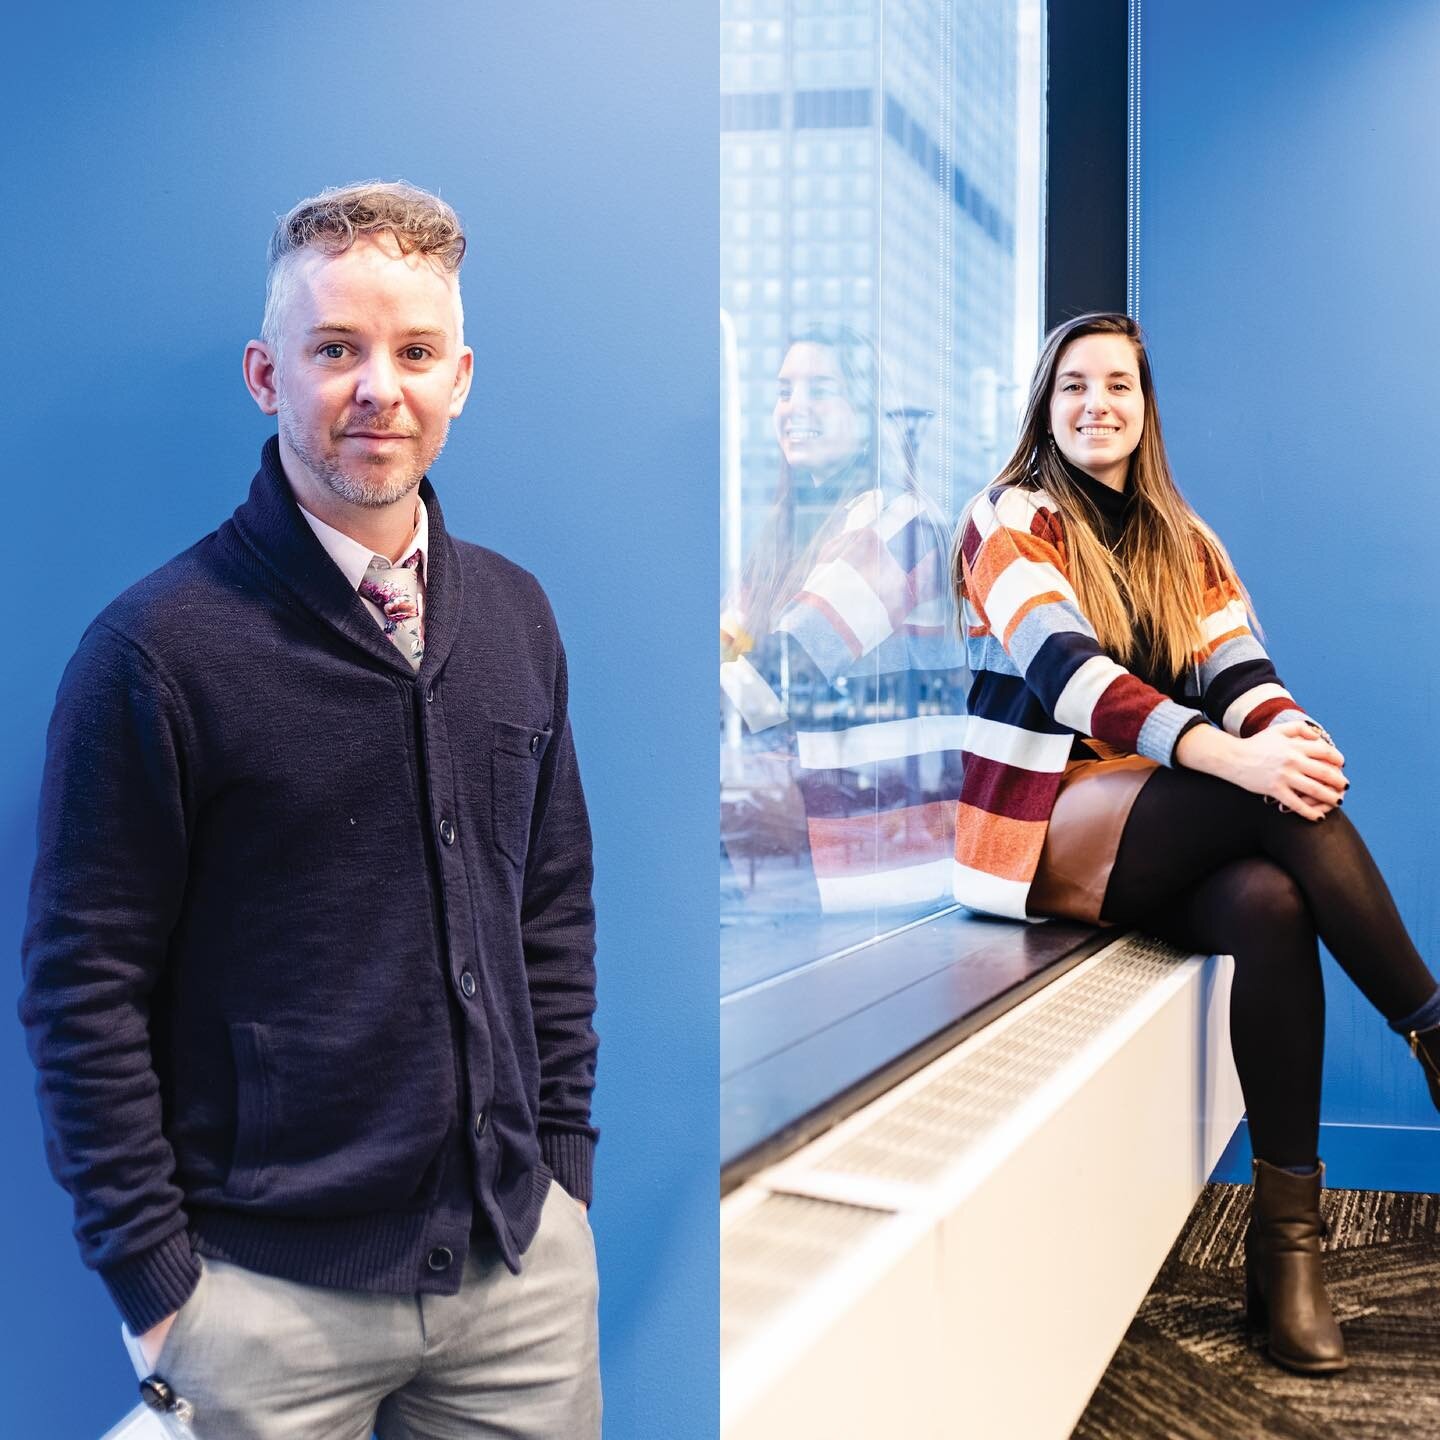 Our RPMI family has grown again! We are very excited to introduce 2 new talented interior design members to the team, Paul and Victoria! 

We have so many upcoming projects that we are still looking to expand. Many more stories and fun things to shar